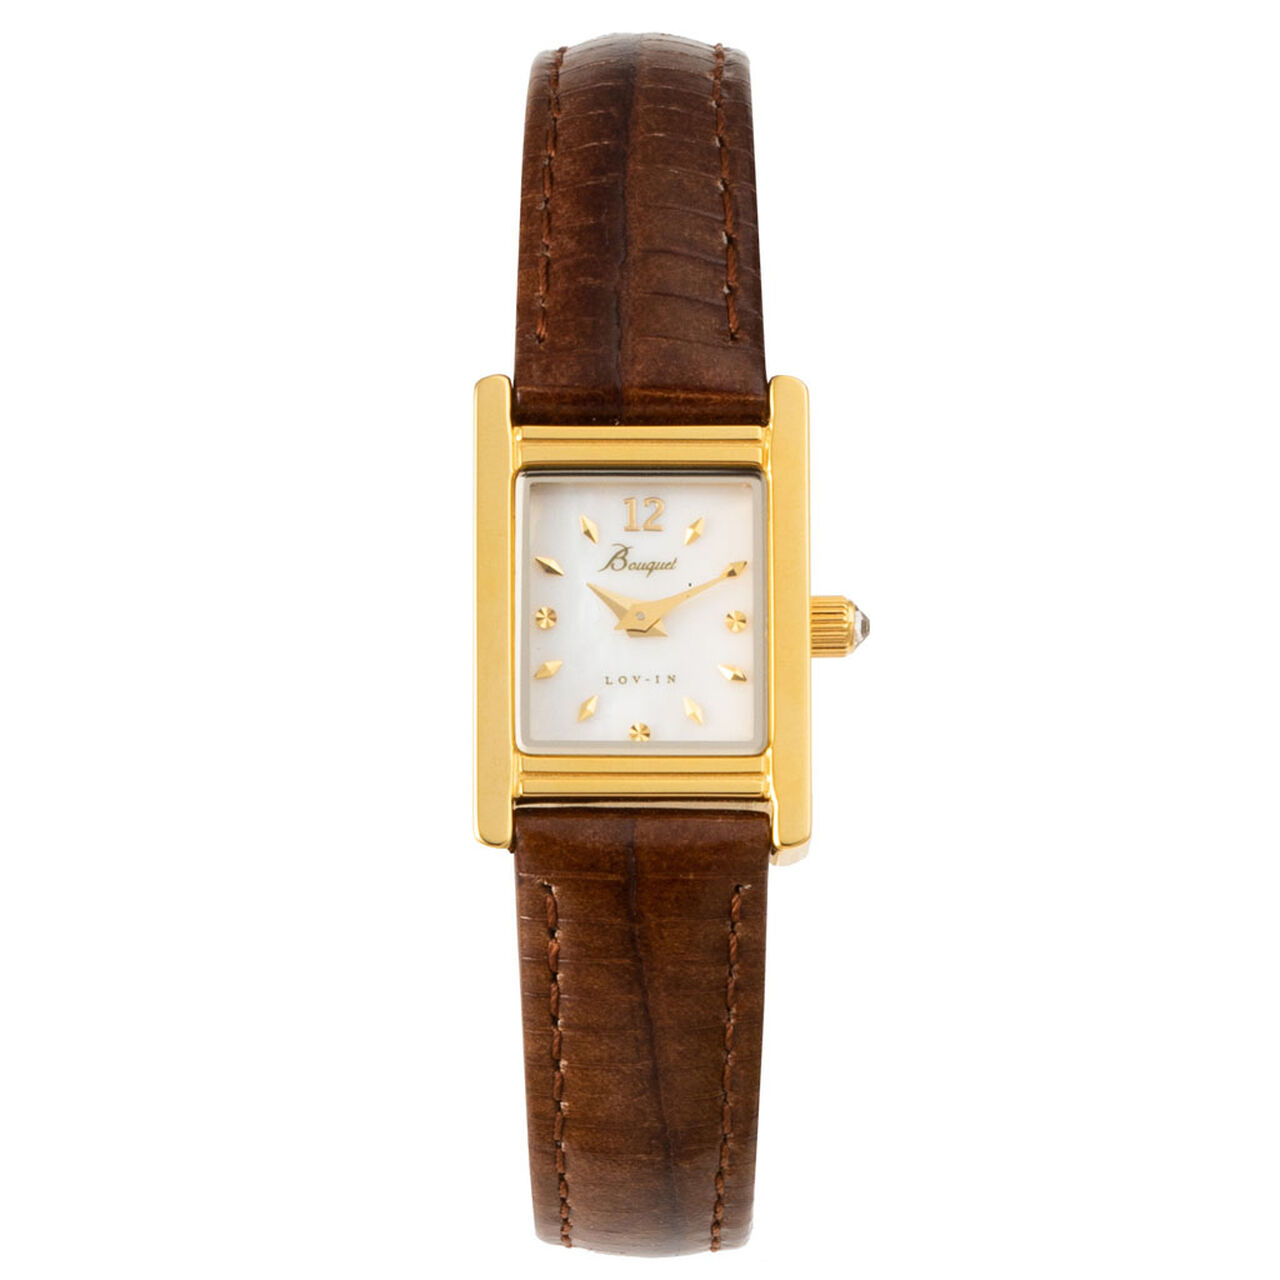 LOV-IN BOUQUET Ladies' square watch,, large image number 0